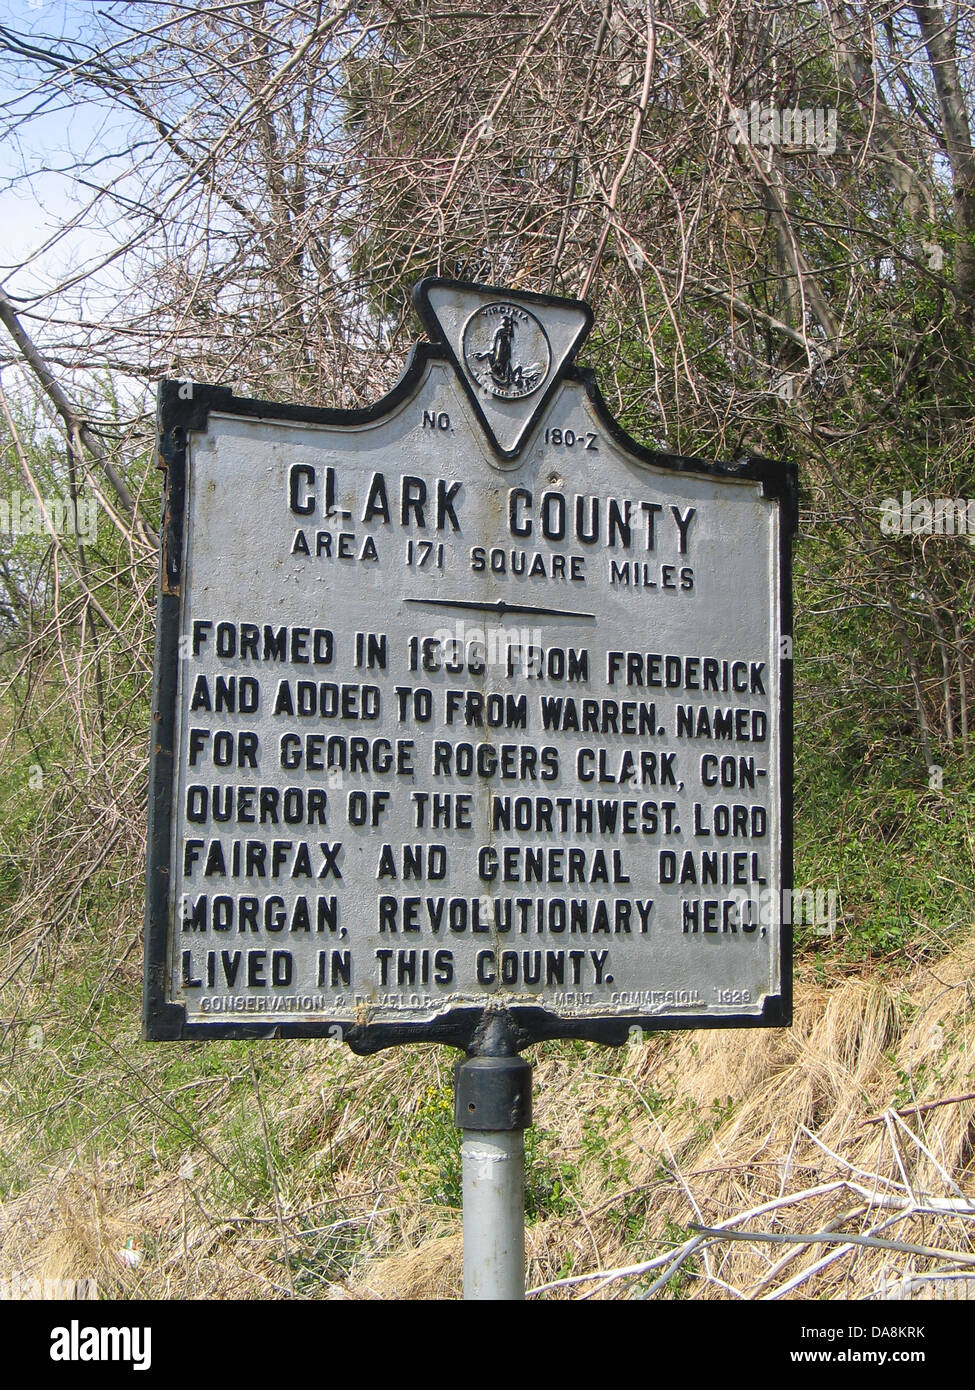 CLARKE COUNTY Area 171 Square Miles Formed in 1836 from Frederick and added to from Warren. Named for George Rogers Clark, Conqueror of the Northwest. Lord Fairfax and General Daniel Morgan, Revolutionary Hero, lived in this county. Conservation & Development Commission, 1929. Stock Photo